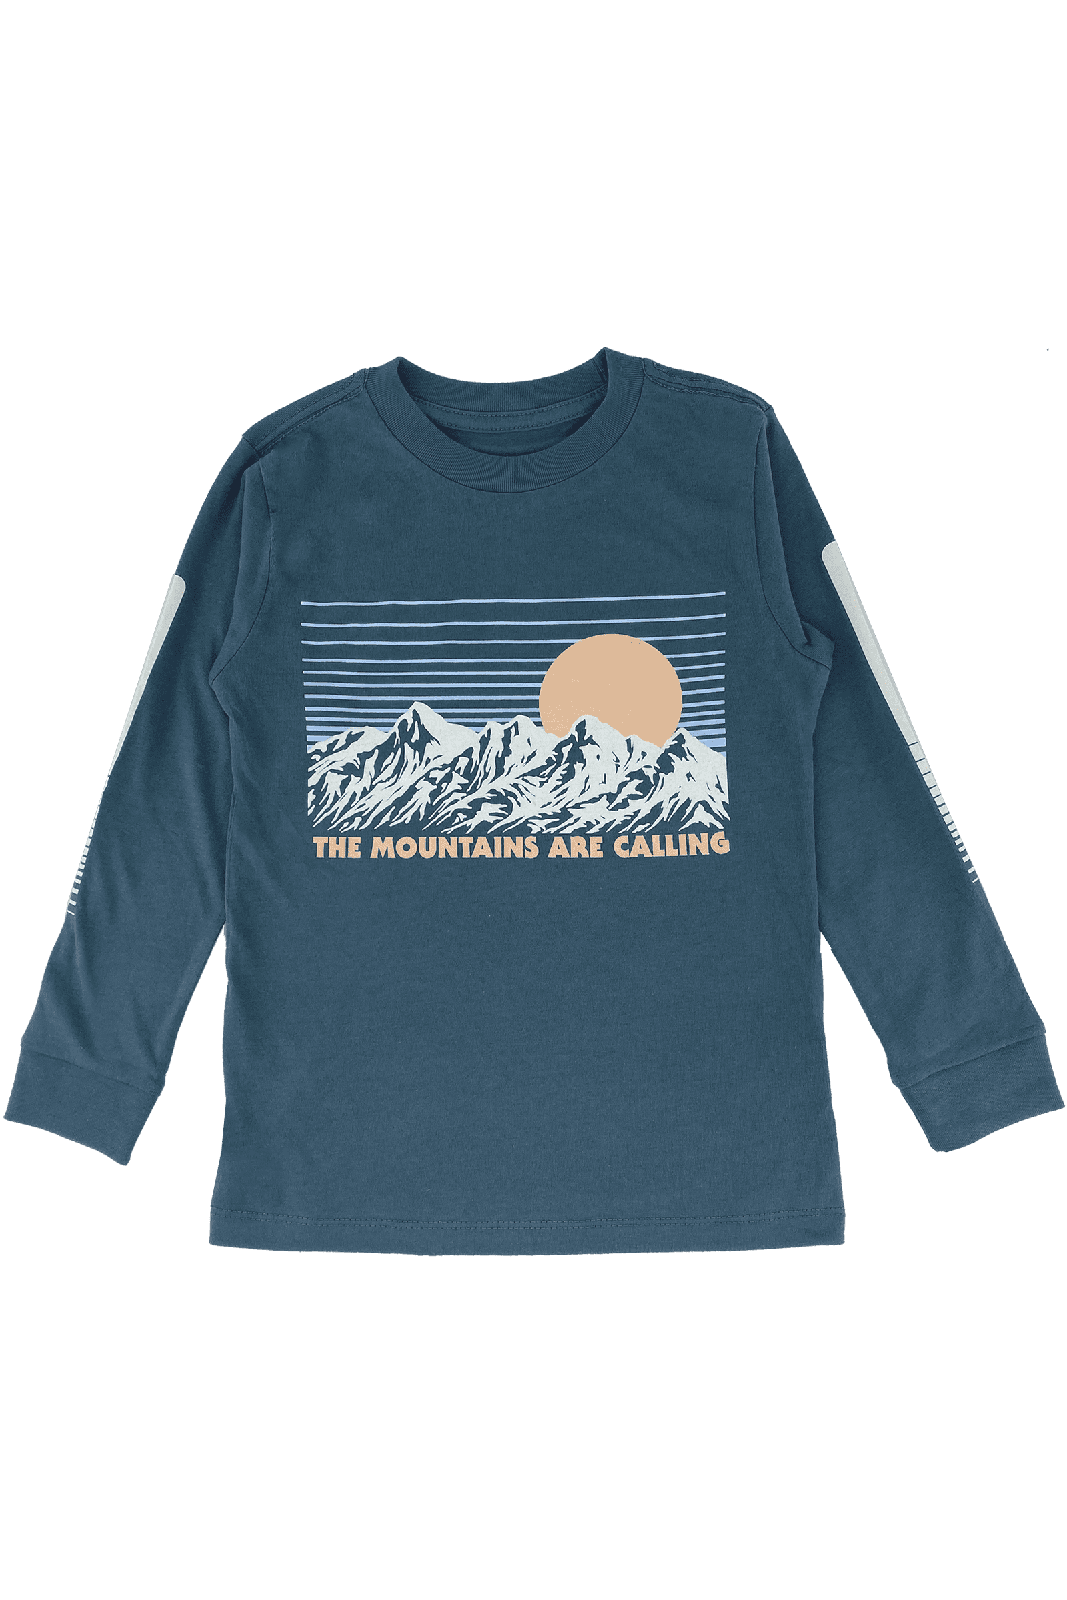 Mountains Are Calling Long Sleeve Tee Tea for Three: A Children's Boutique